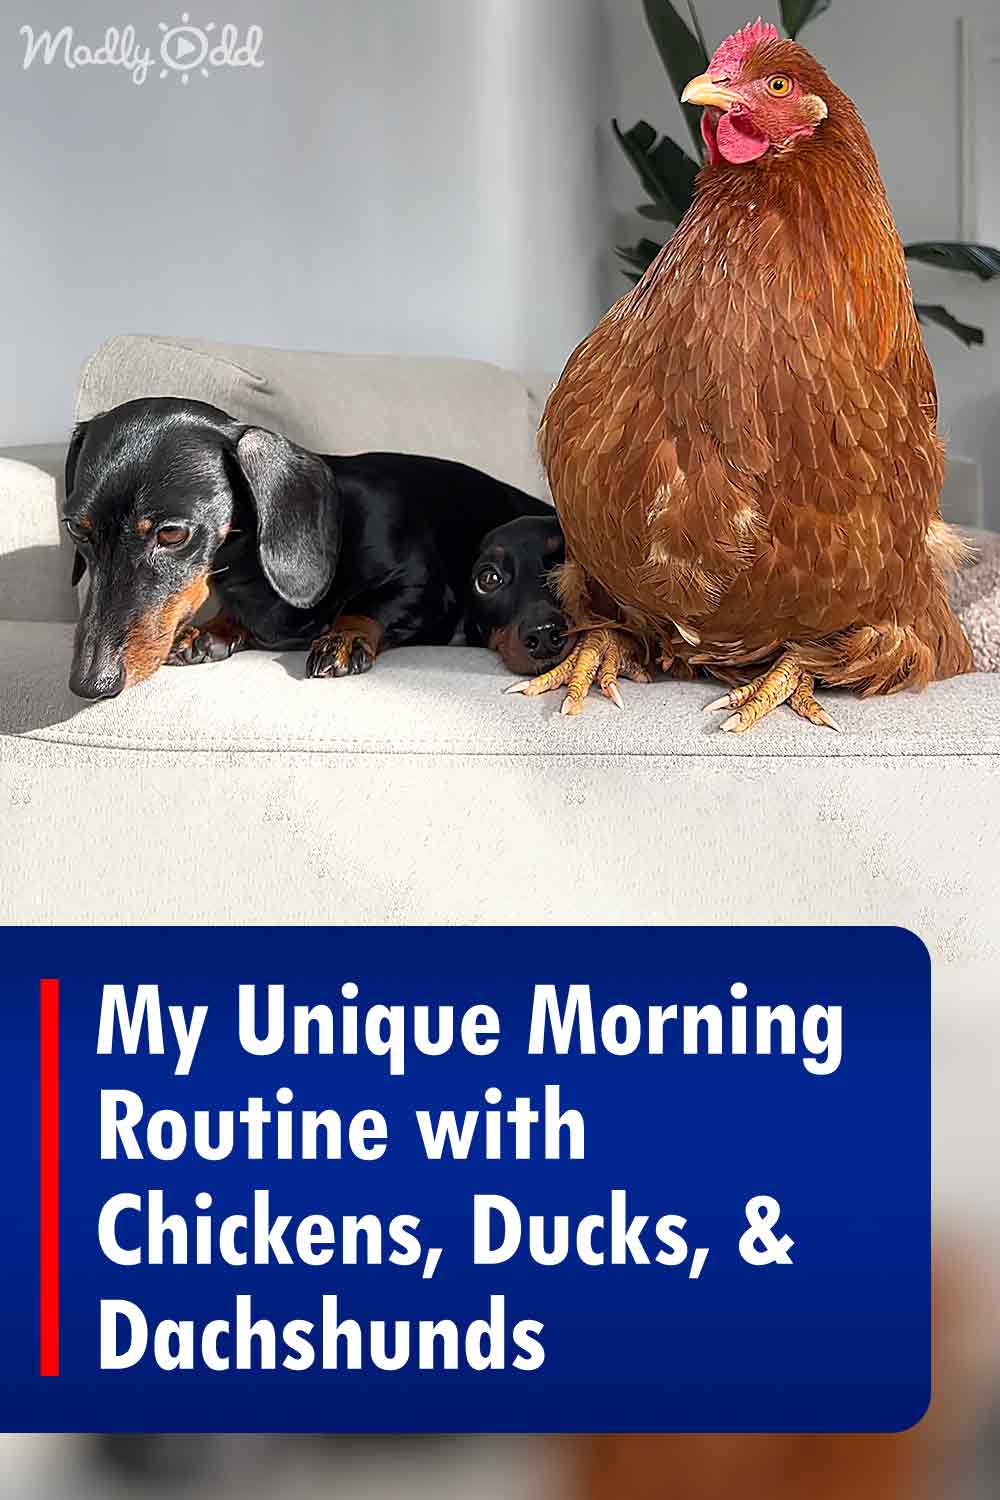 My Unique Morning Routine with Chickens, Ducks, & Dachshunds